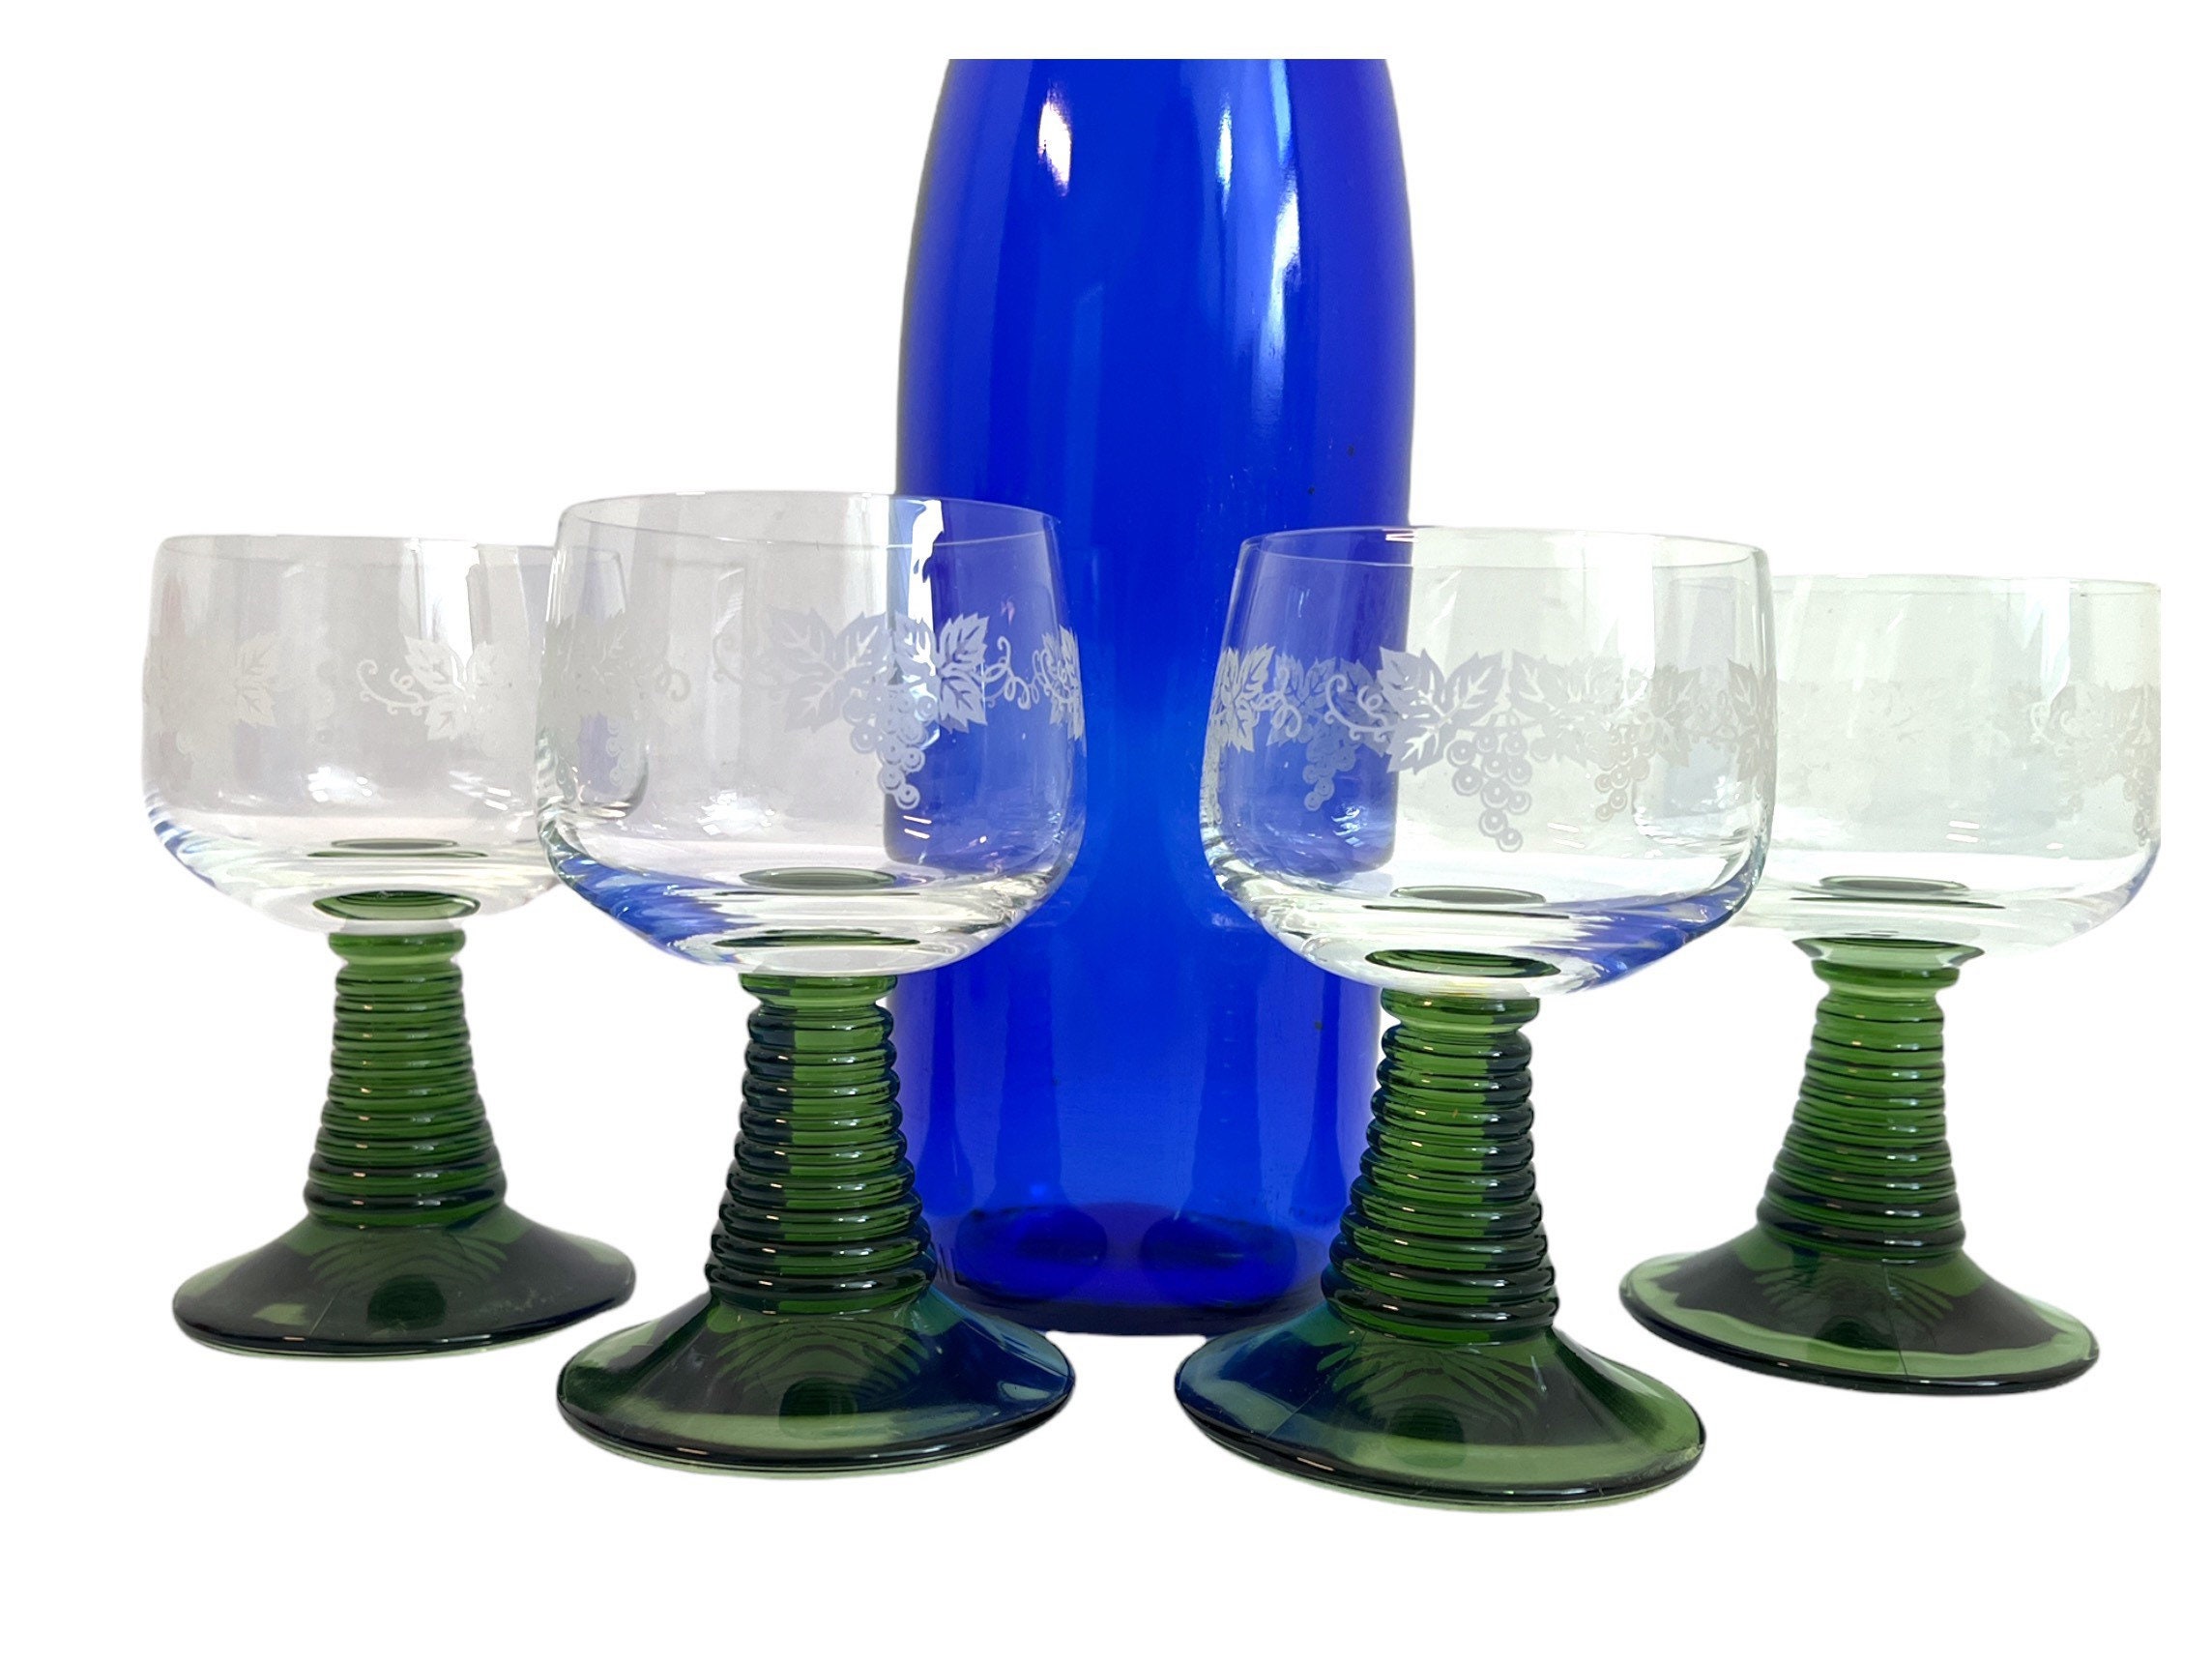 Wine Goblets Blue Green Clear Glass Vintage Set of Three Large Wine Glasses  Aqua Blue Tops Clear Glass Stems and Bases Unique Bar Glasses 